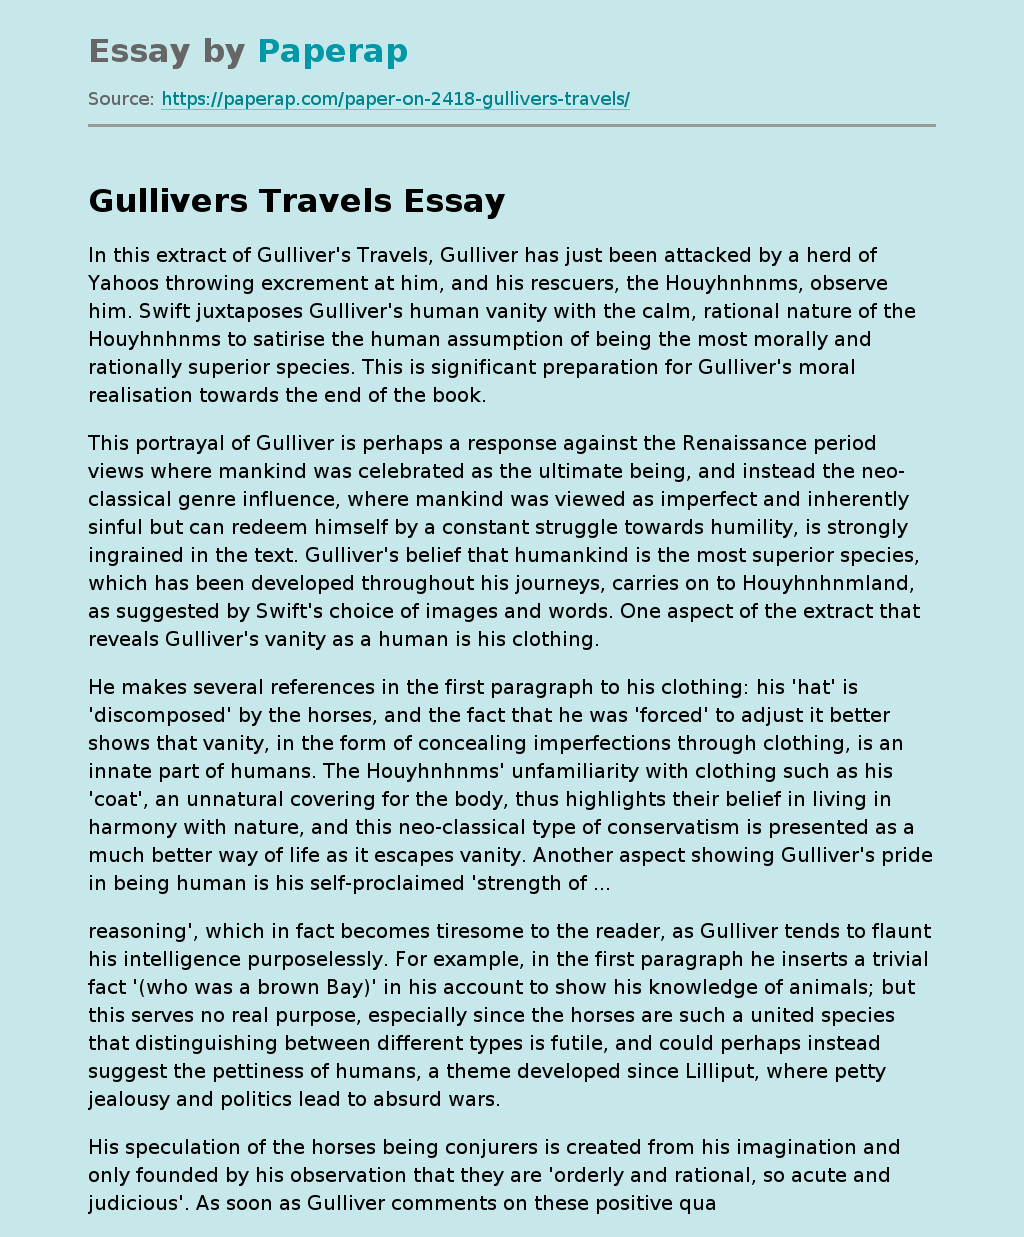 Analysis of an Excerpt From Gullivers Travels